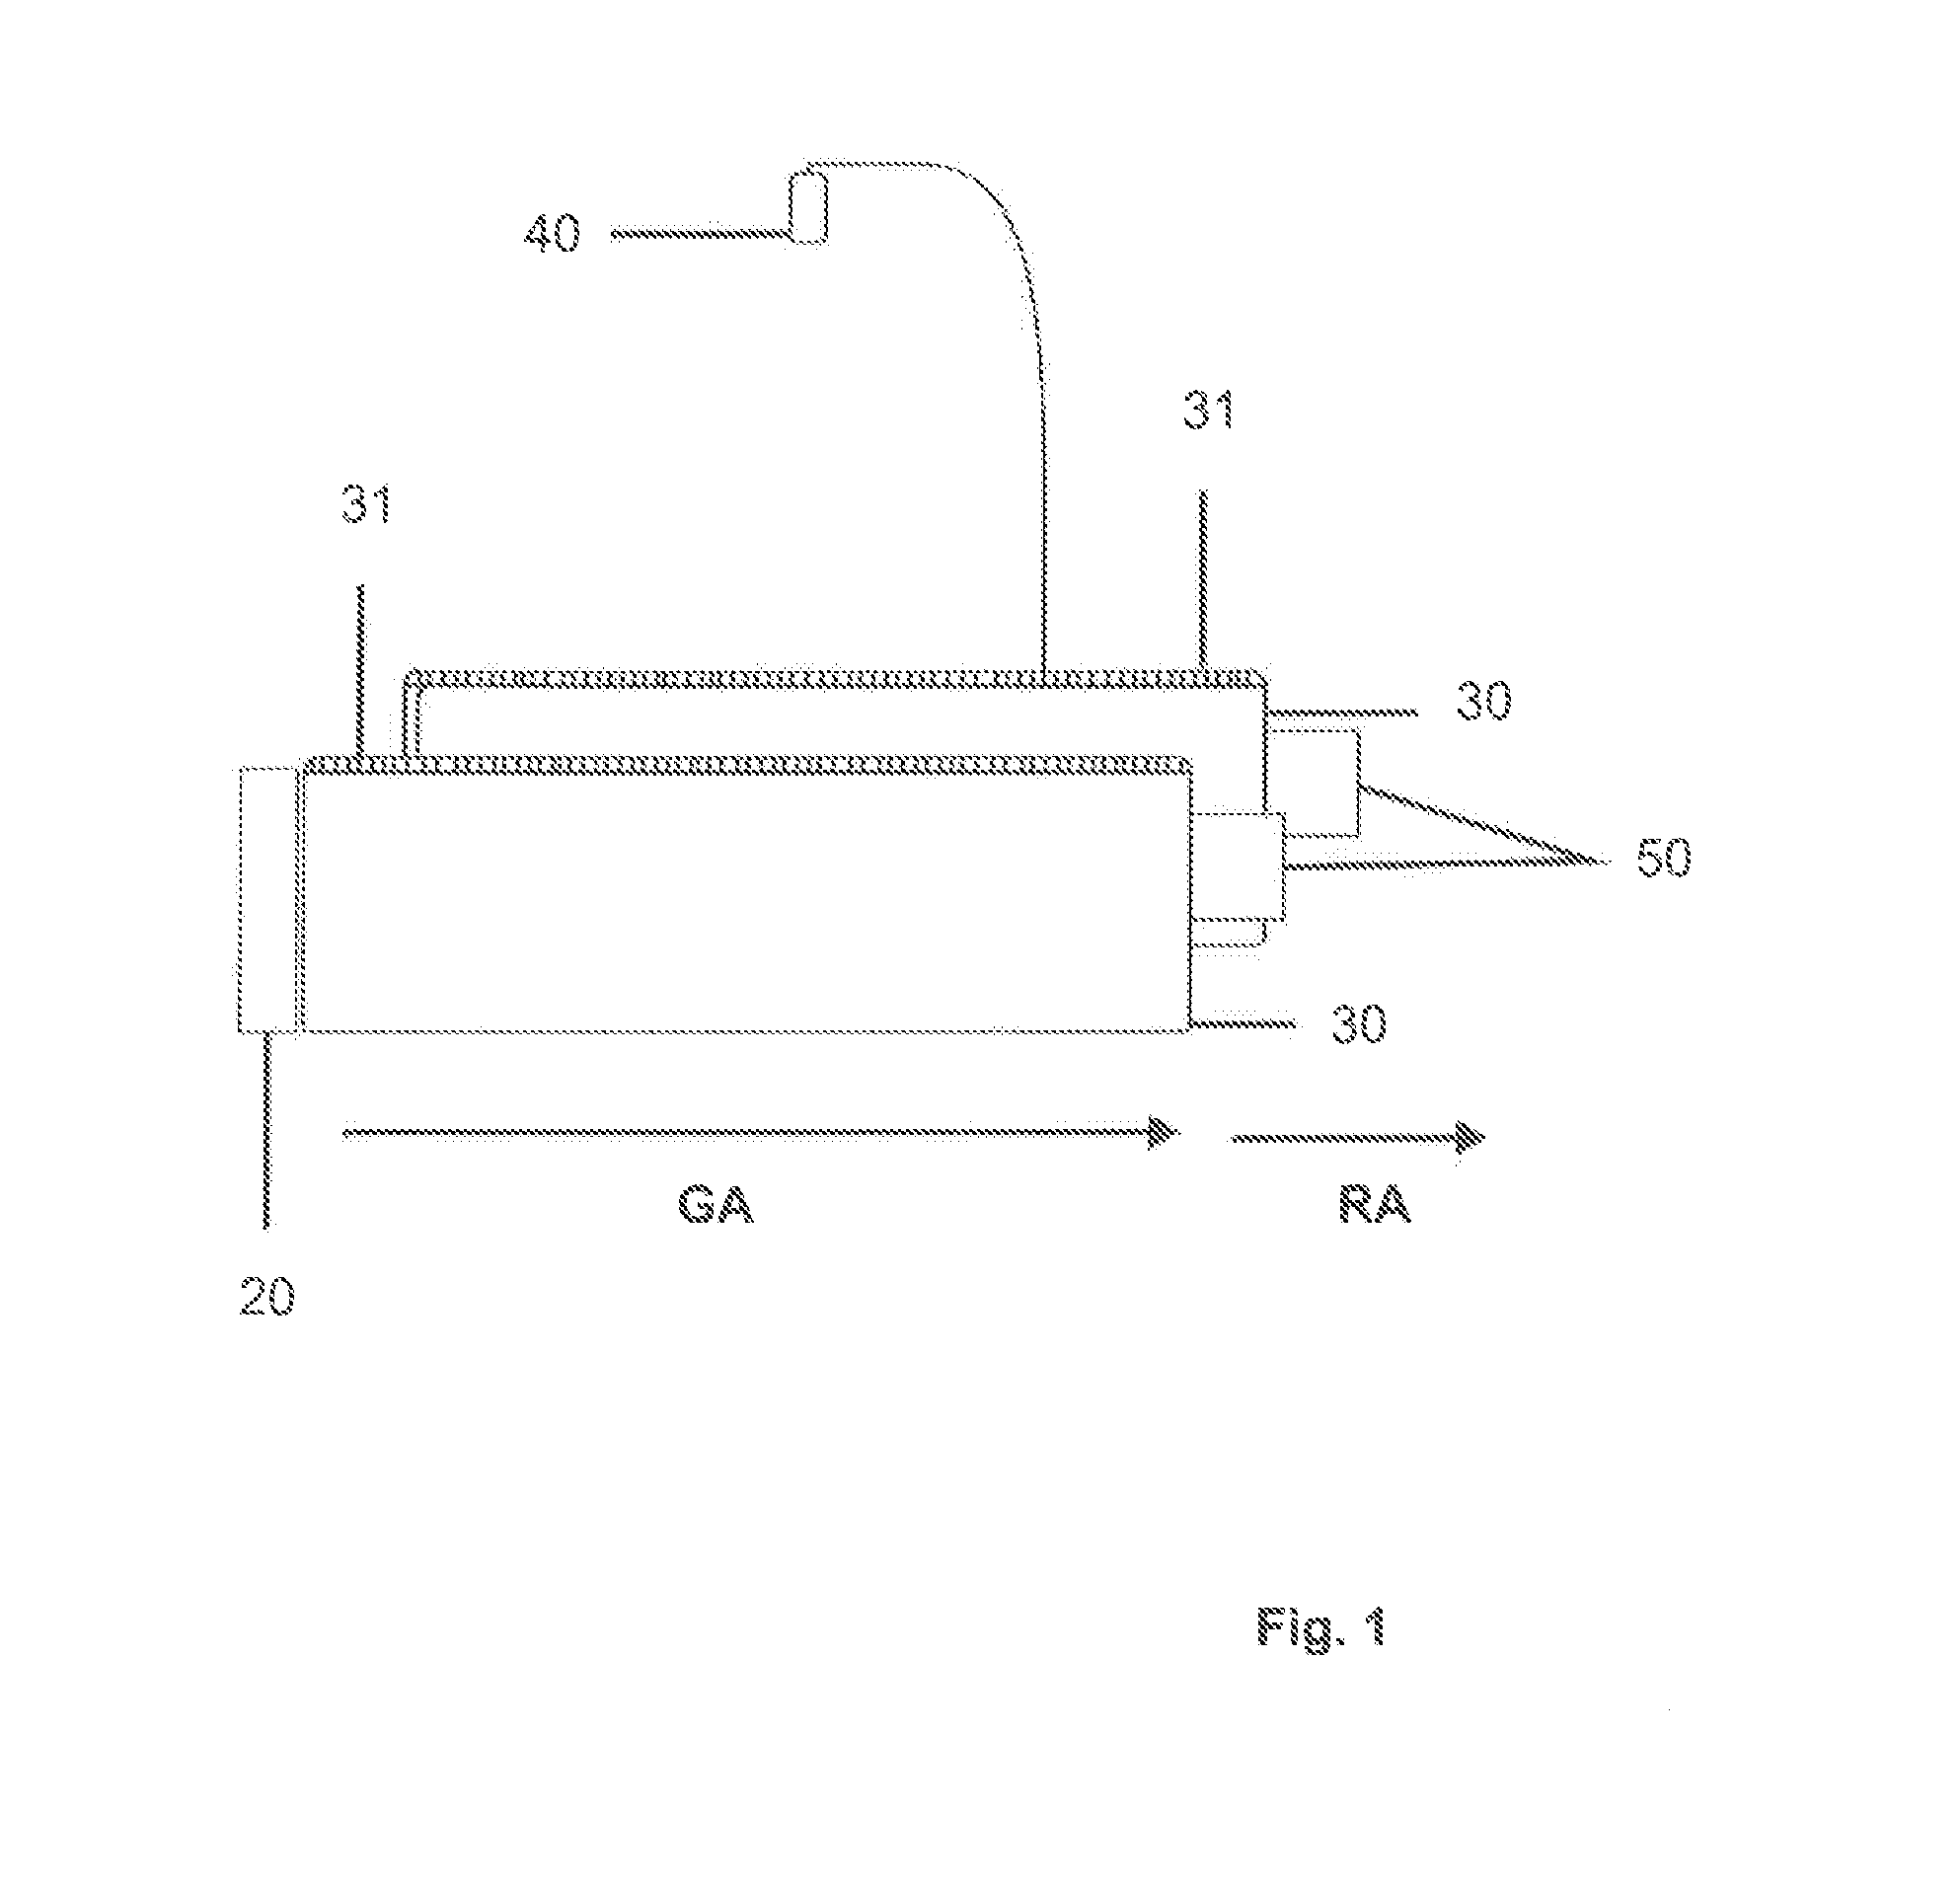 System and Method of Control and Monitoring Access to a Restricted Area